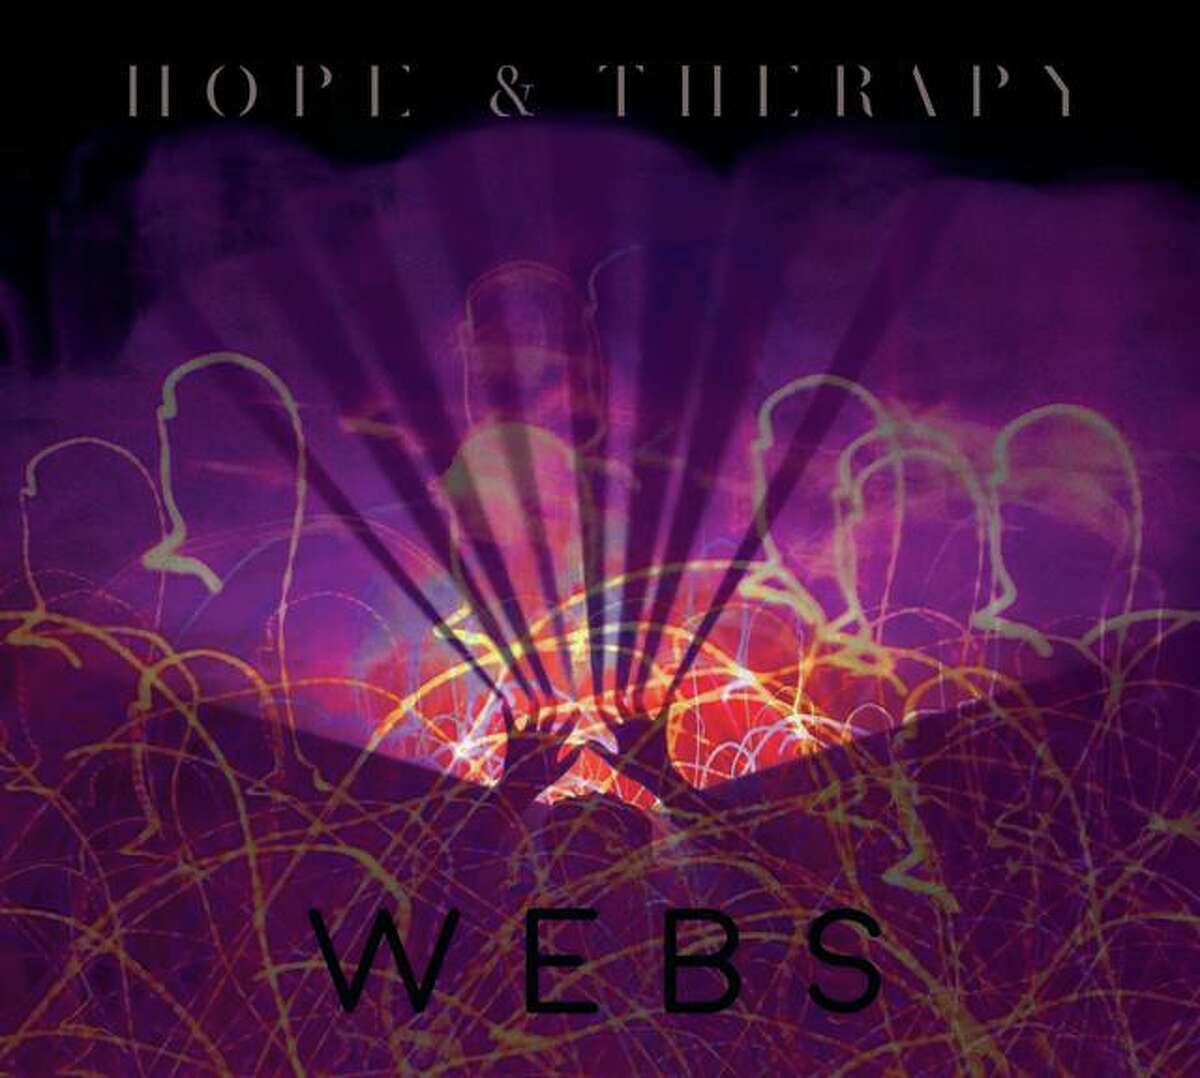 Cover art for new EP "Webs" released on Jan. 1, 2016. It can be purchased or streamed for free at the band's BandCamp page, hopeandtherapy.bandcamp.com